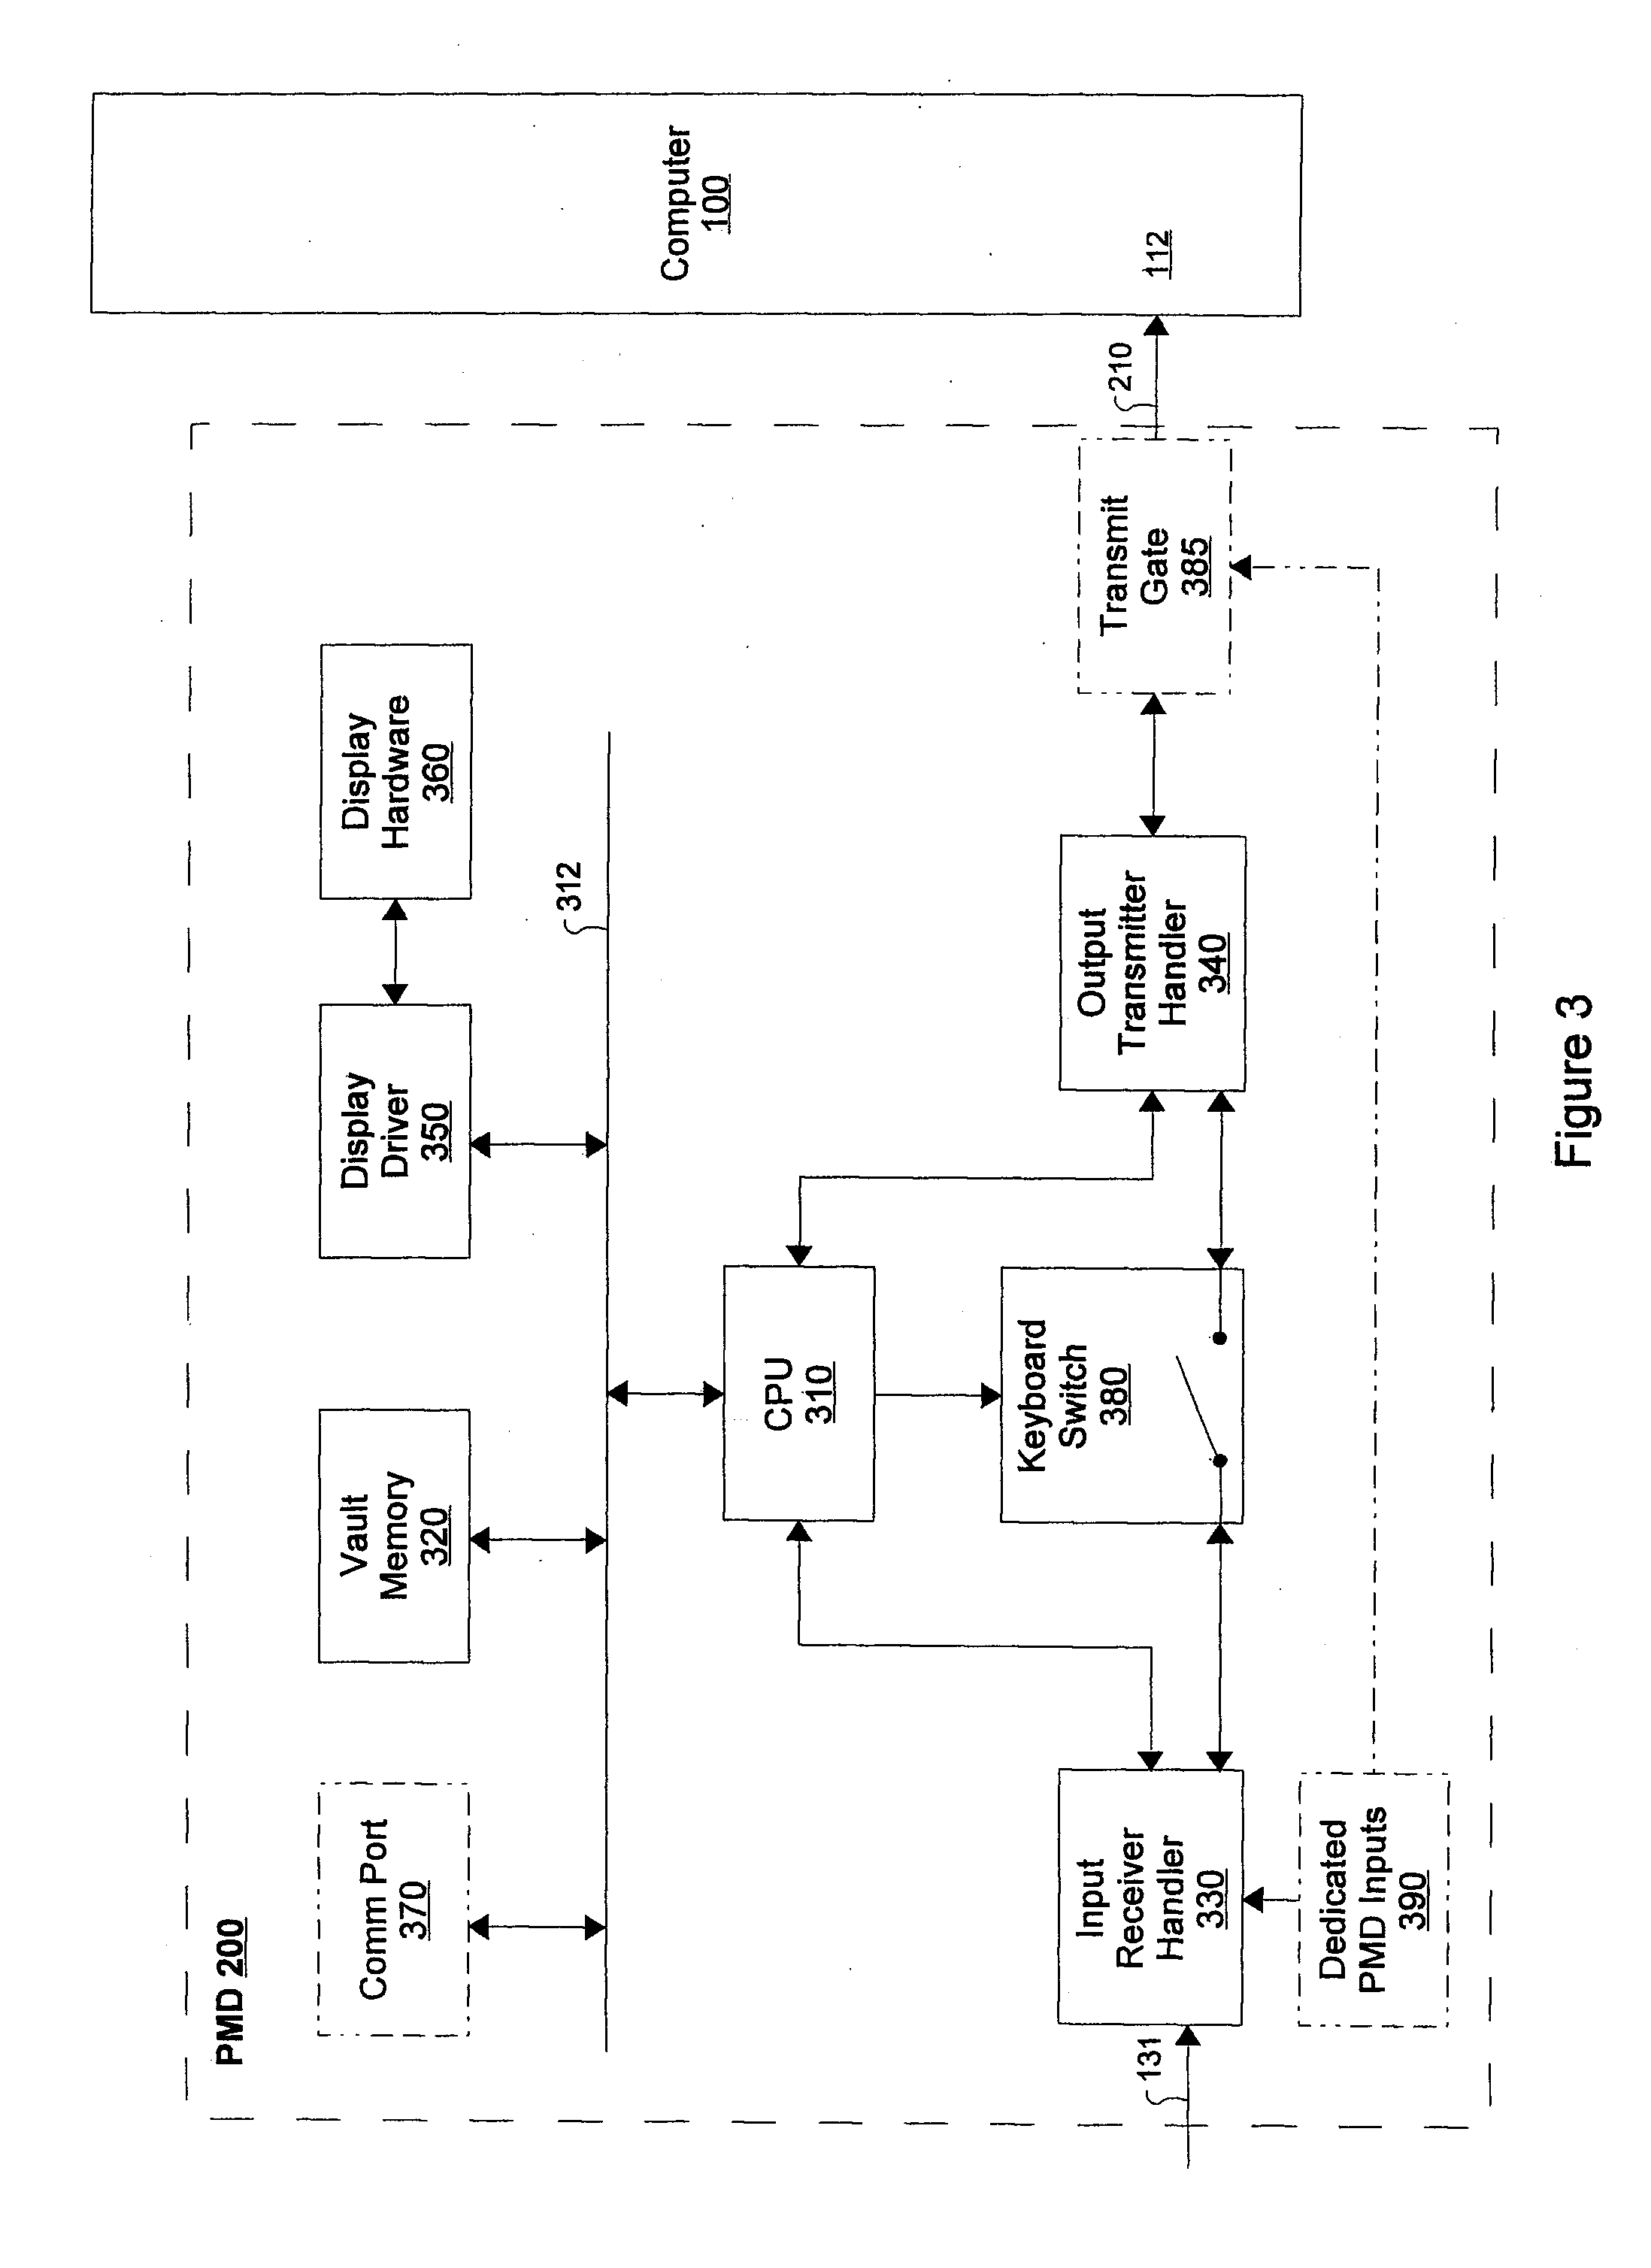 Device for Transmission of Stored Password Information Through a Standard Computer Input Interface